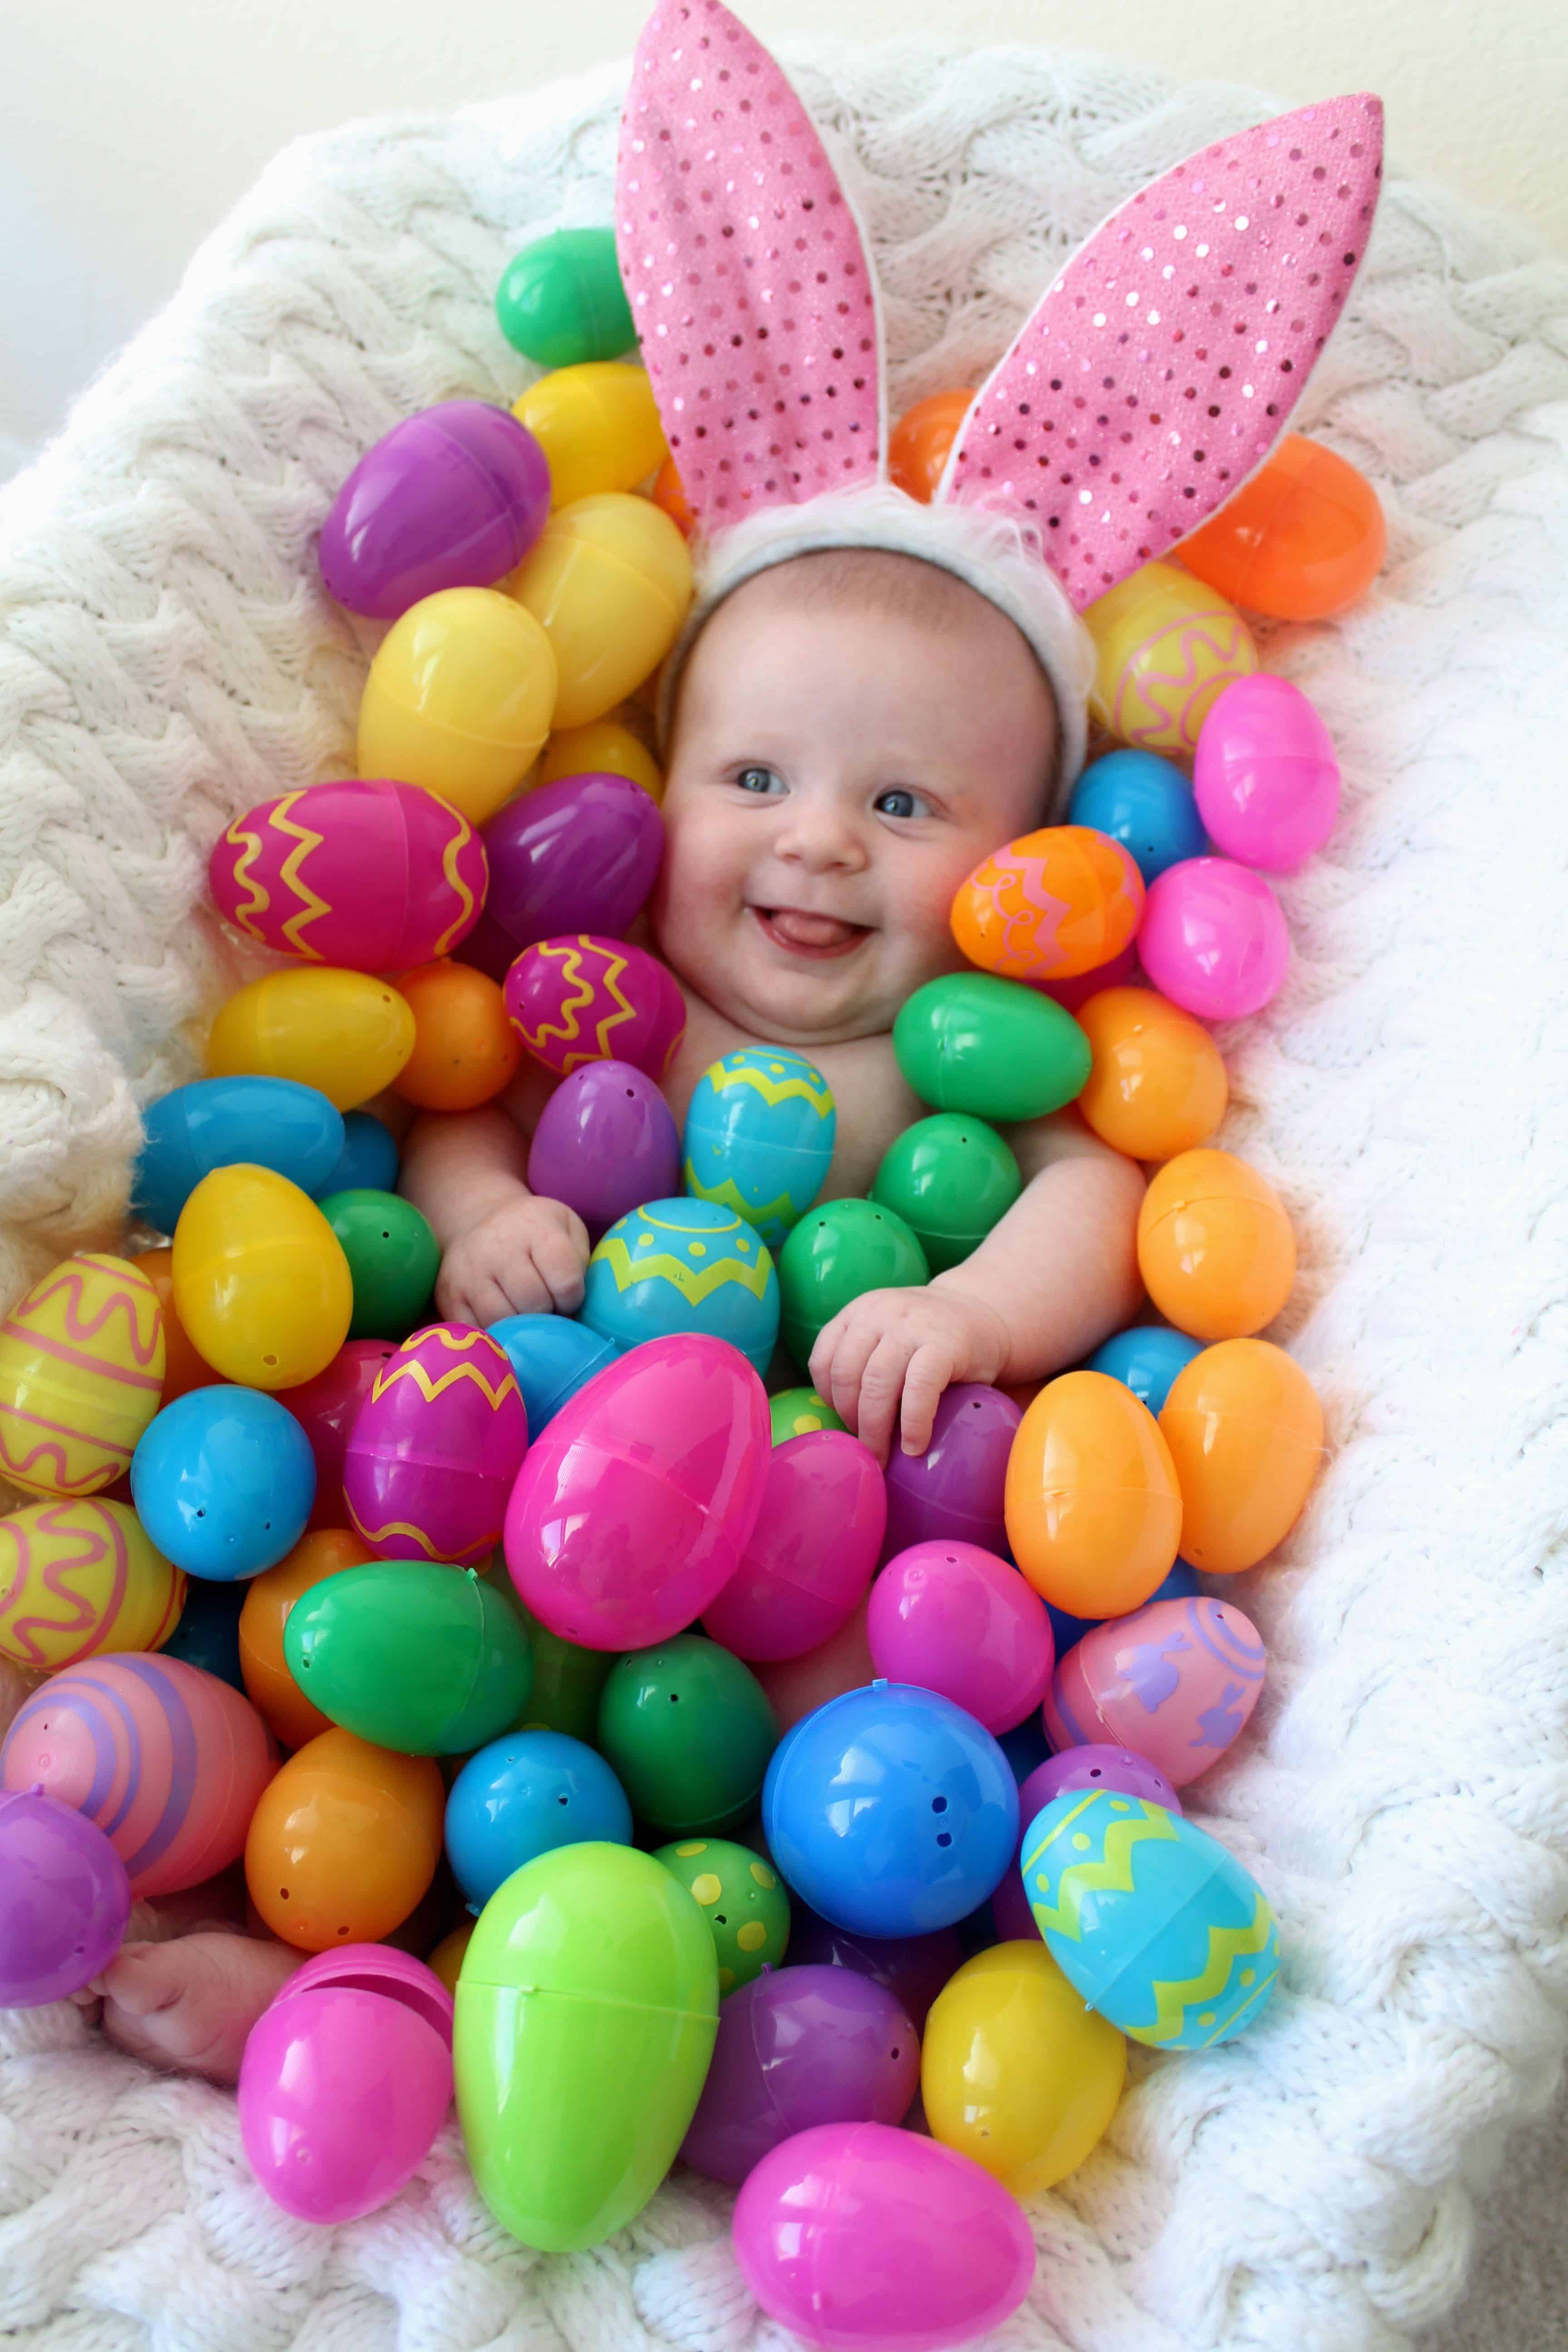 Happy Easter Images - Easter Images 2018 Download ...